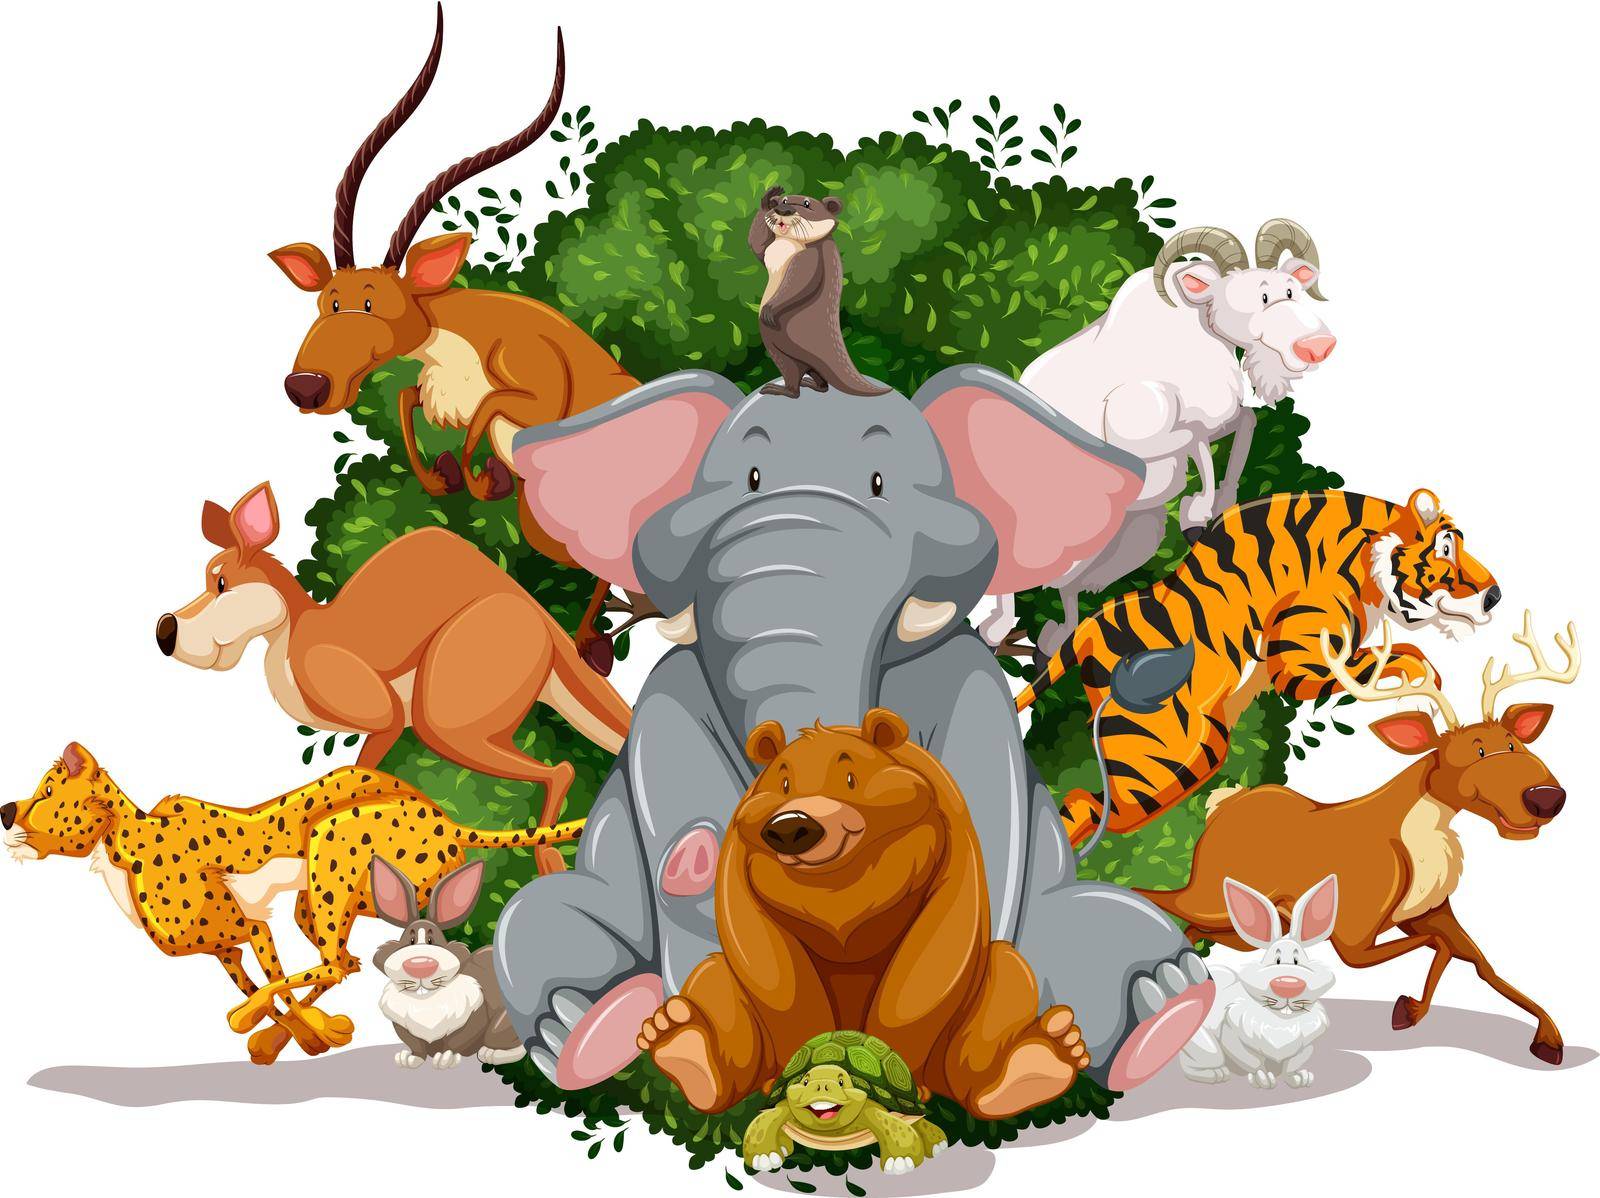 Many animals living together in the jungle